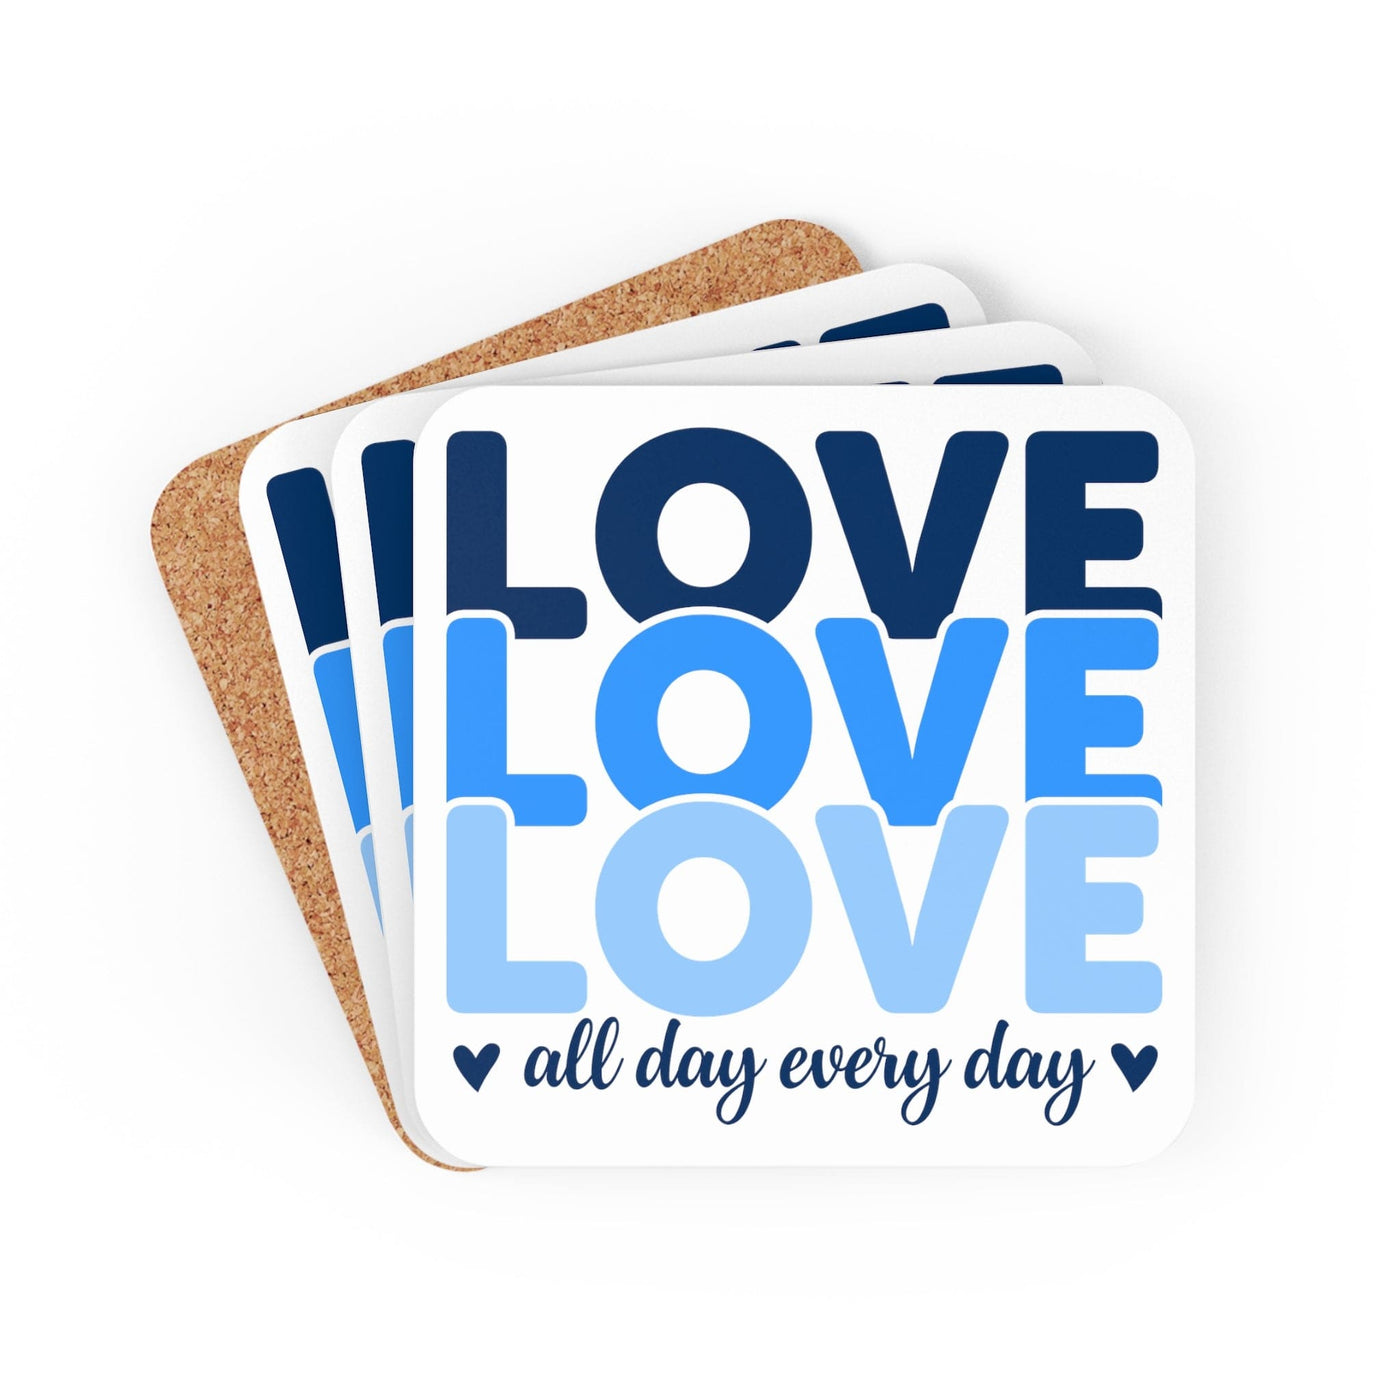 Coaster Set Of 4 For Drinks Love All Day Every Blue Print - Decorative